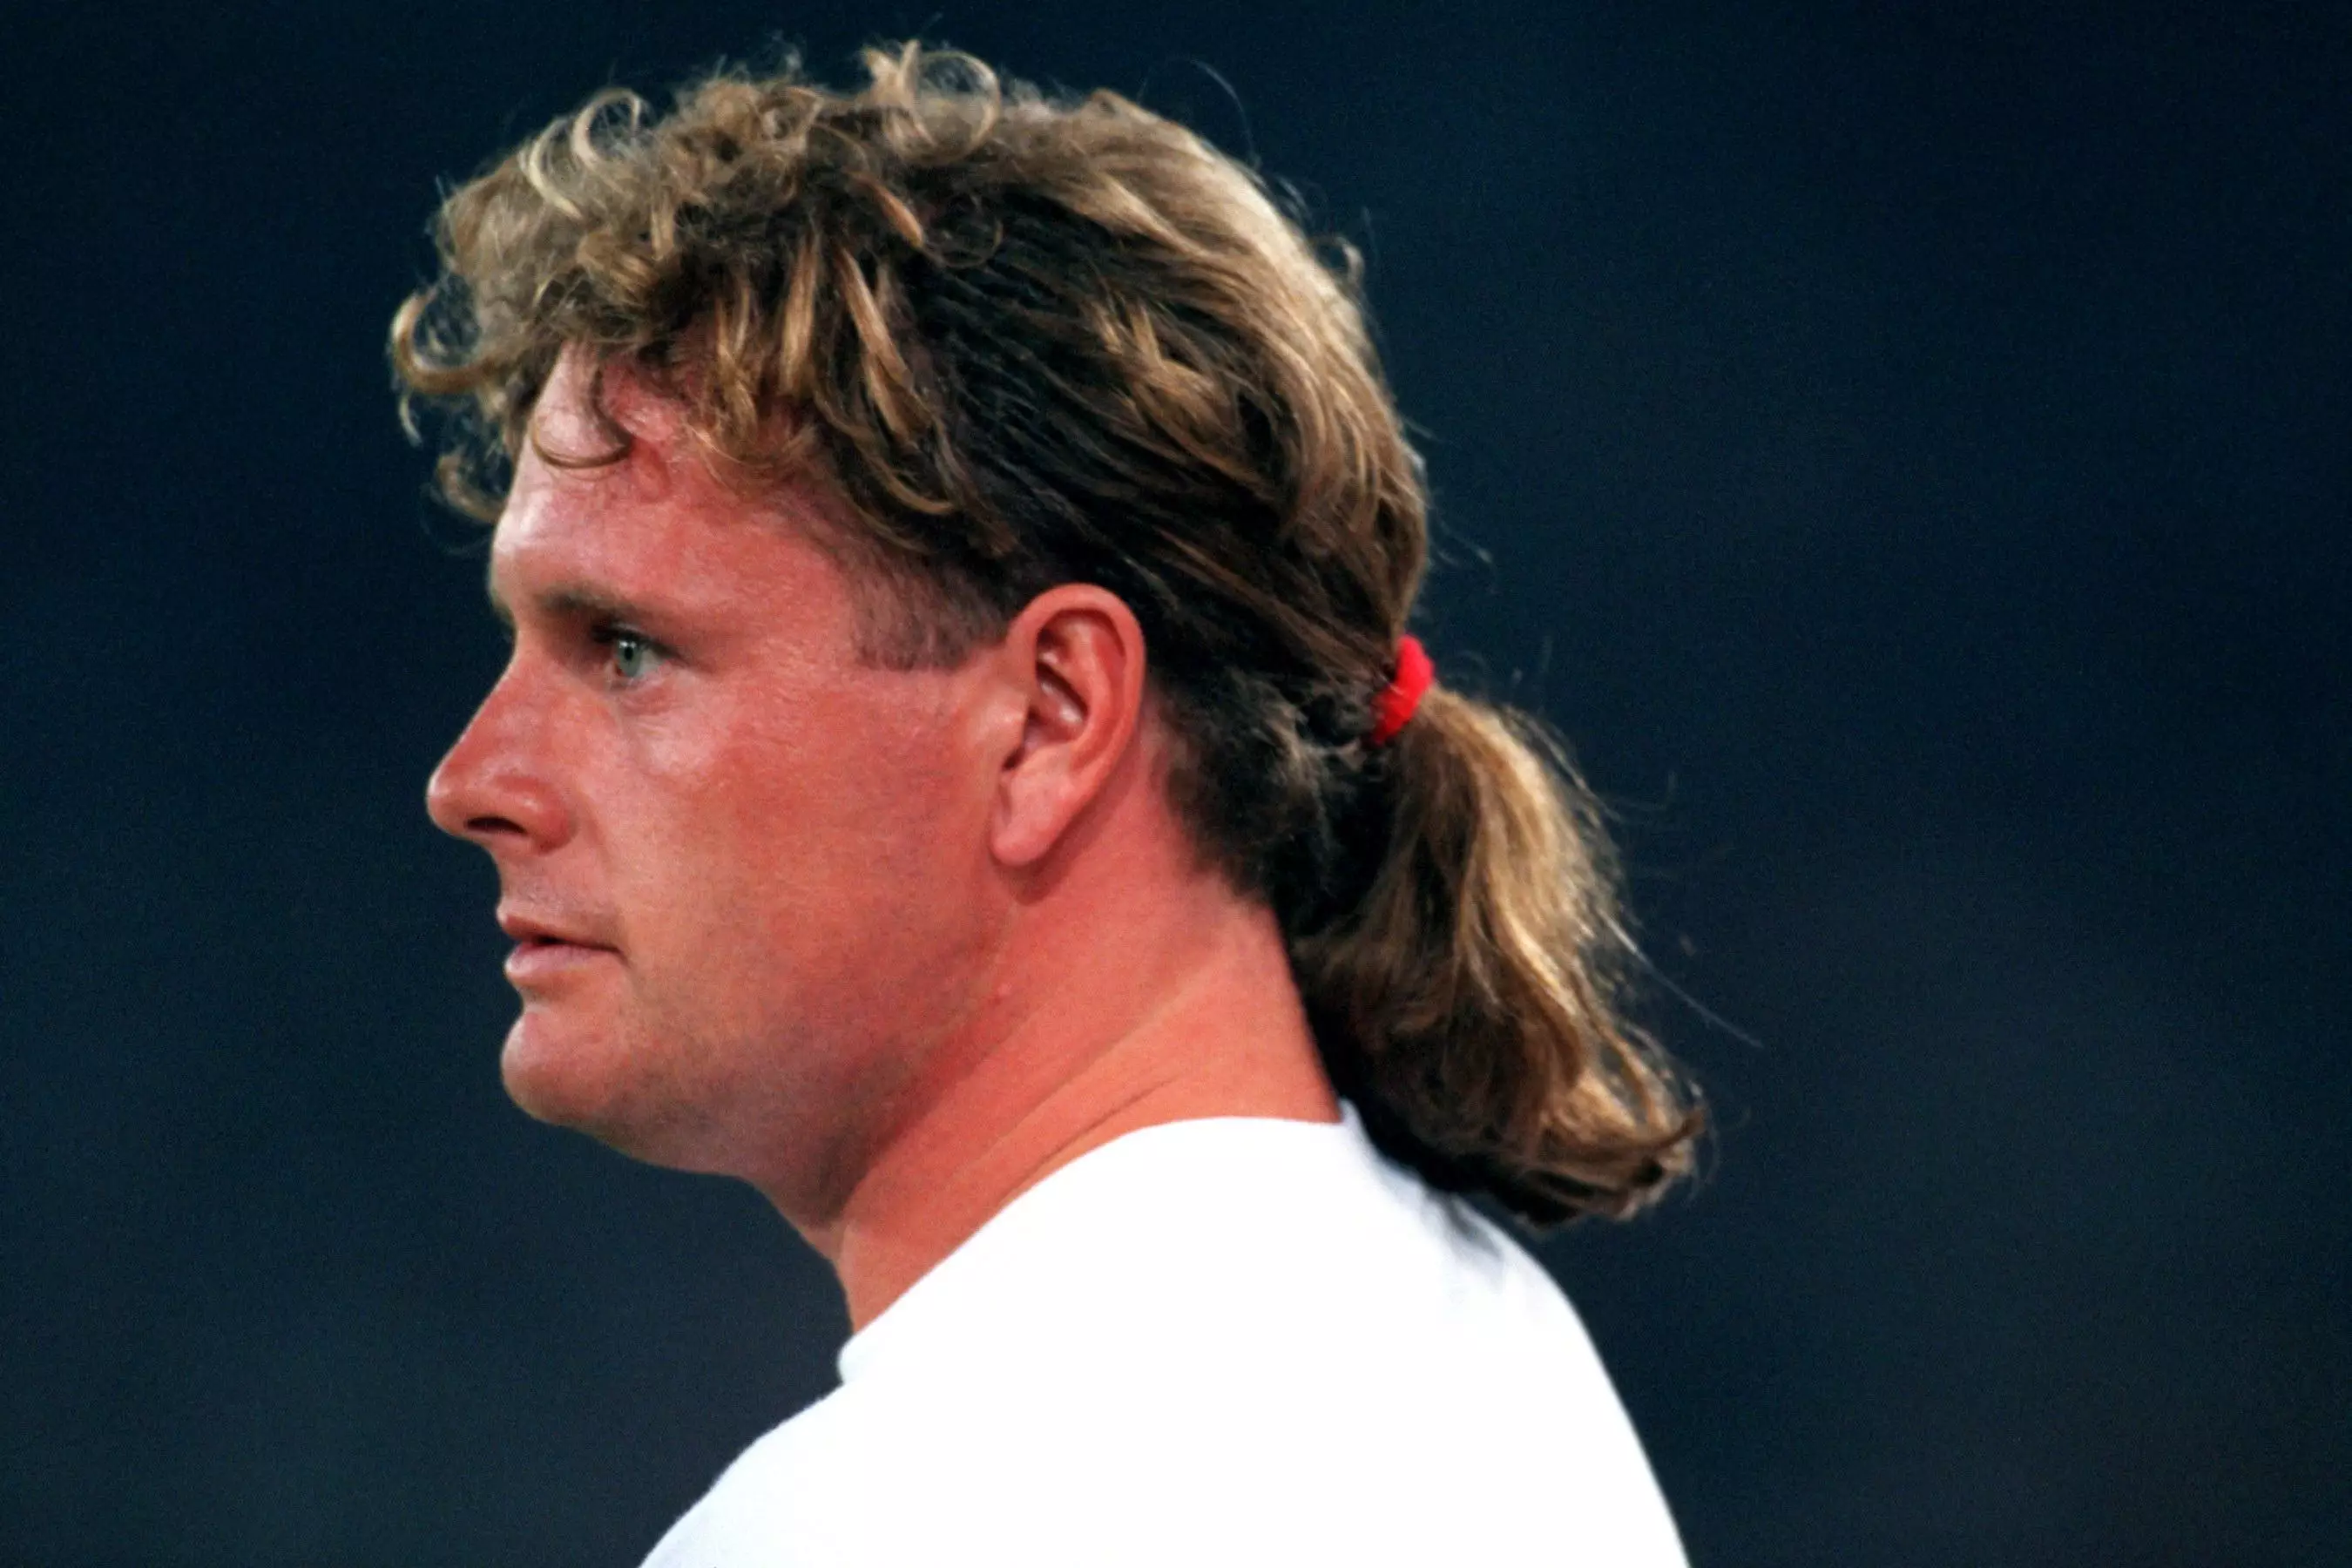 It's a no to Gazza with that barnet, too.